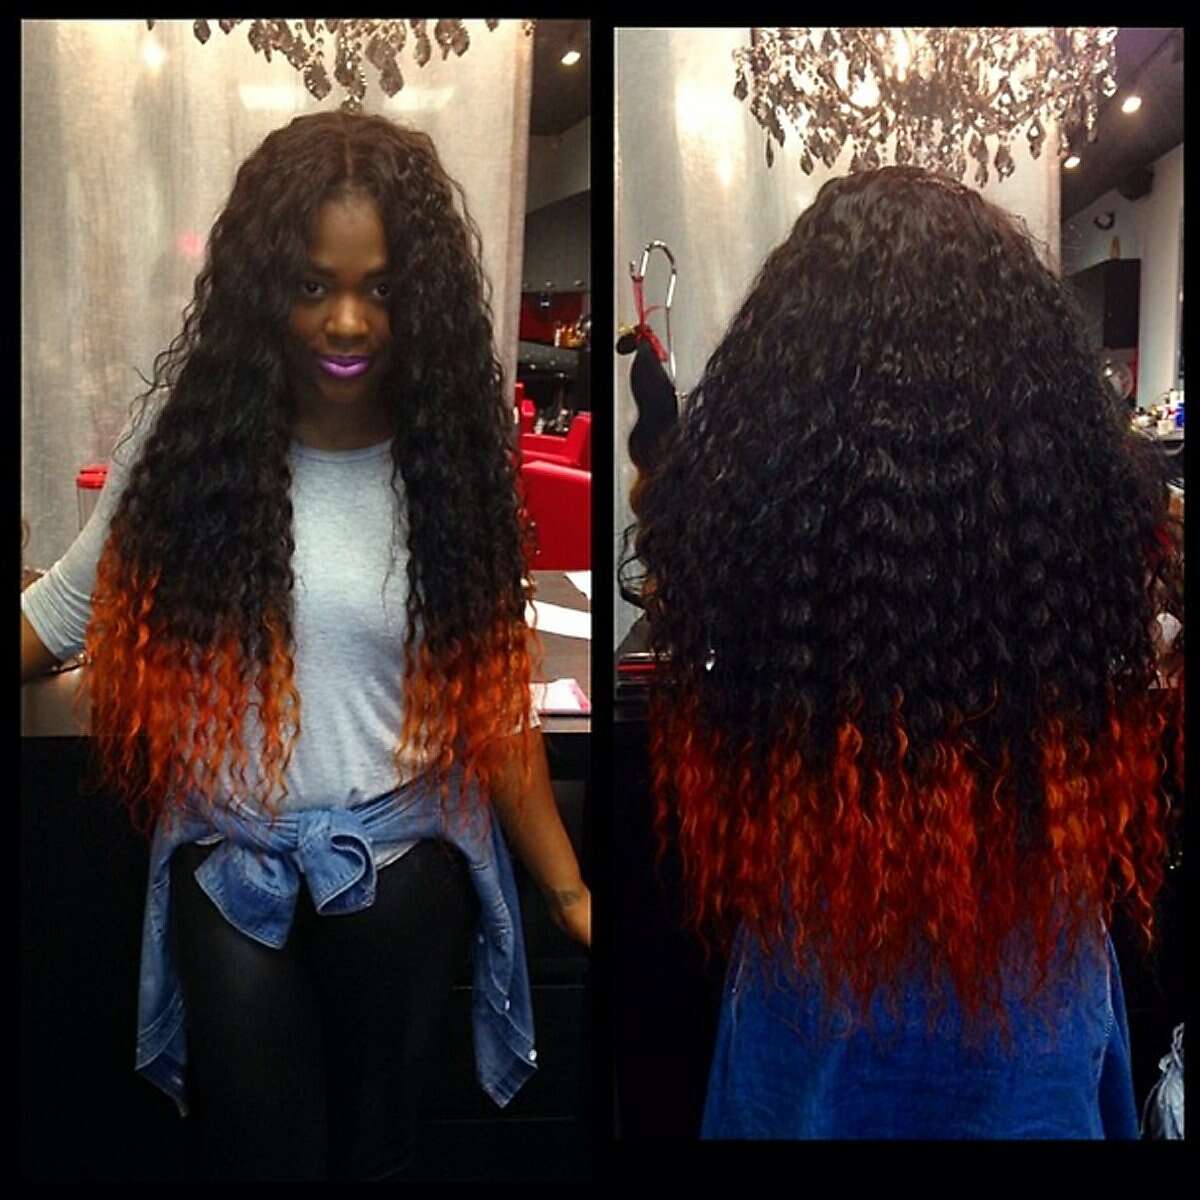 In this undated image provided by Miranda Jade Plater and posted in April 2014 to the Instagram account of her company, Limelight Extensions, Plater poses wearing long, black curly hair extensions with the ends dyed bright orange at her salon in Farmington Hills, Mich. This photo alone has generated about $10,000 in sales. (AP Photo/Courtesy Miranda Jade Plater)